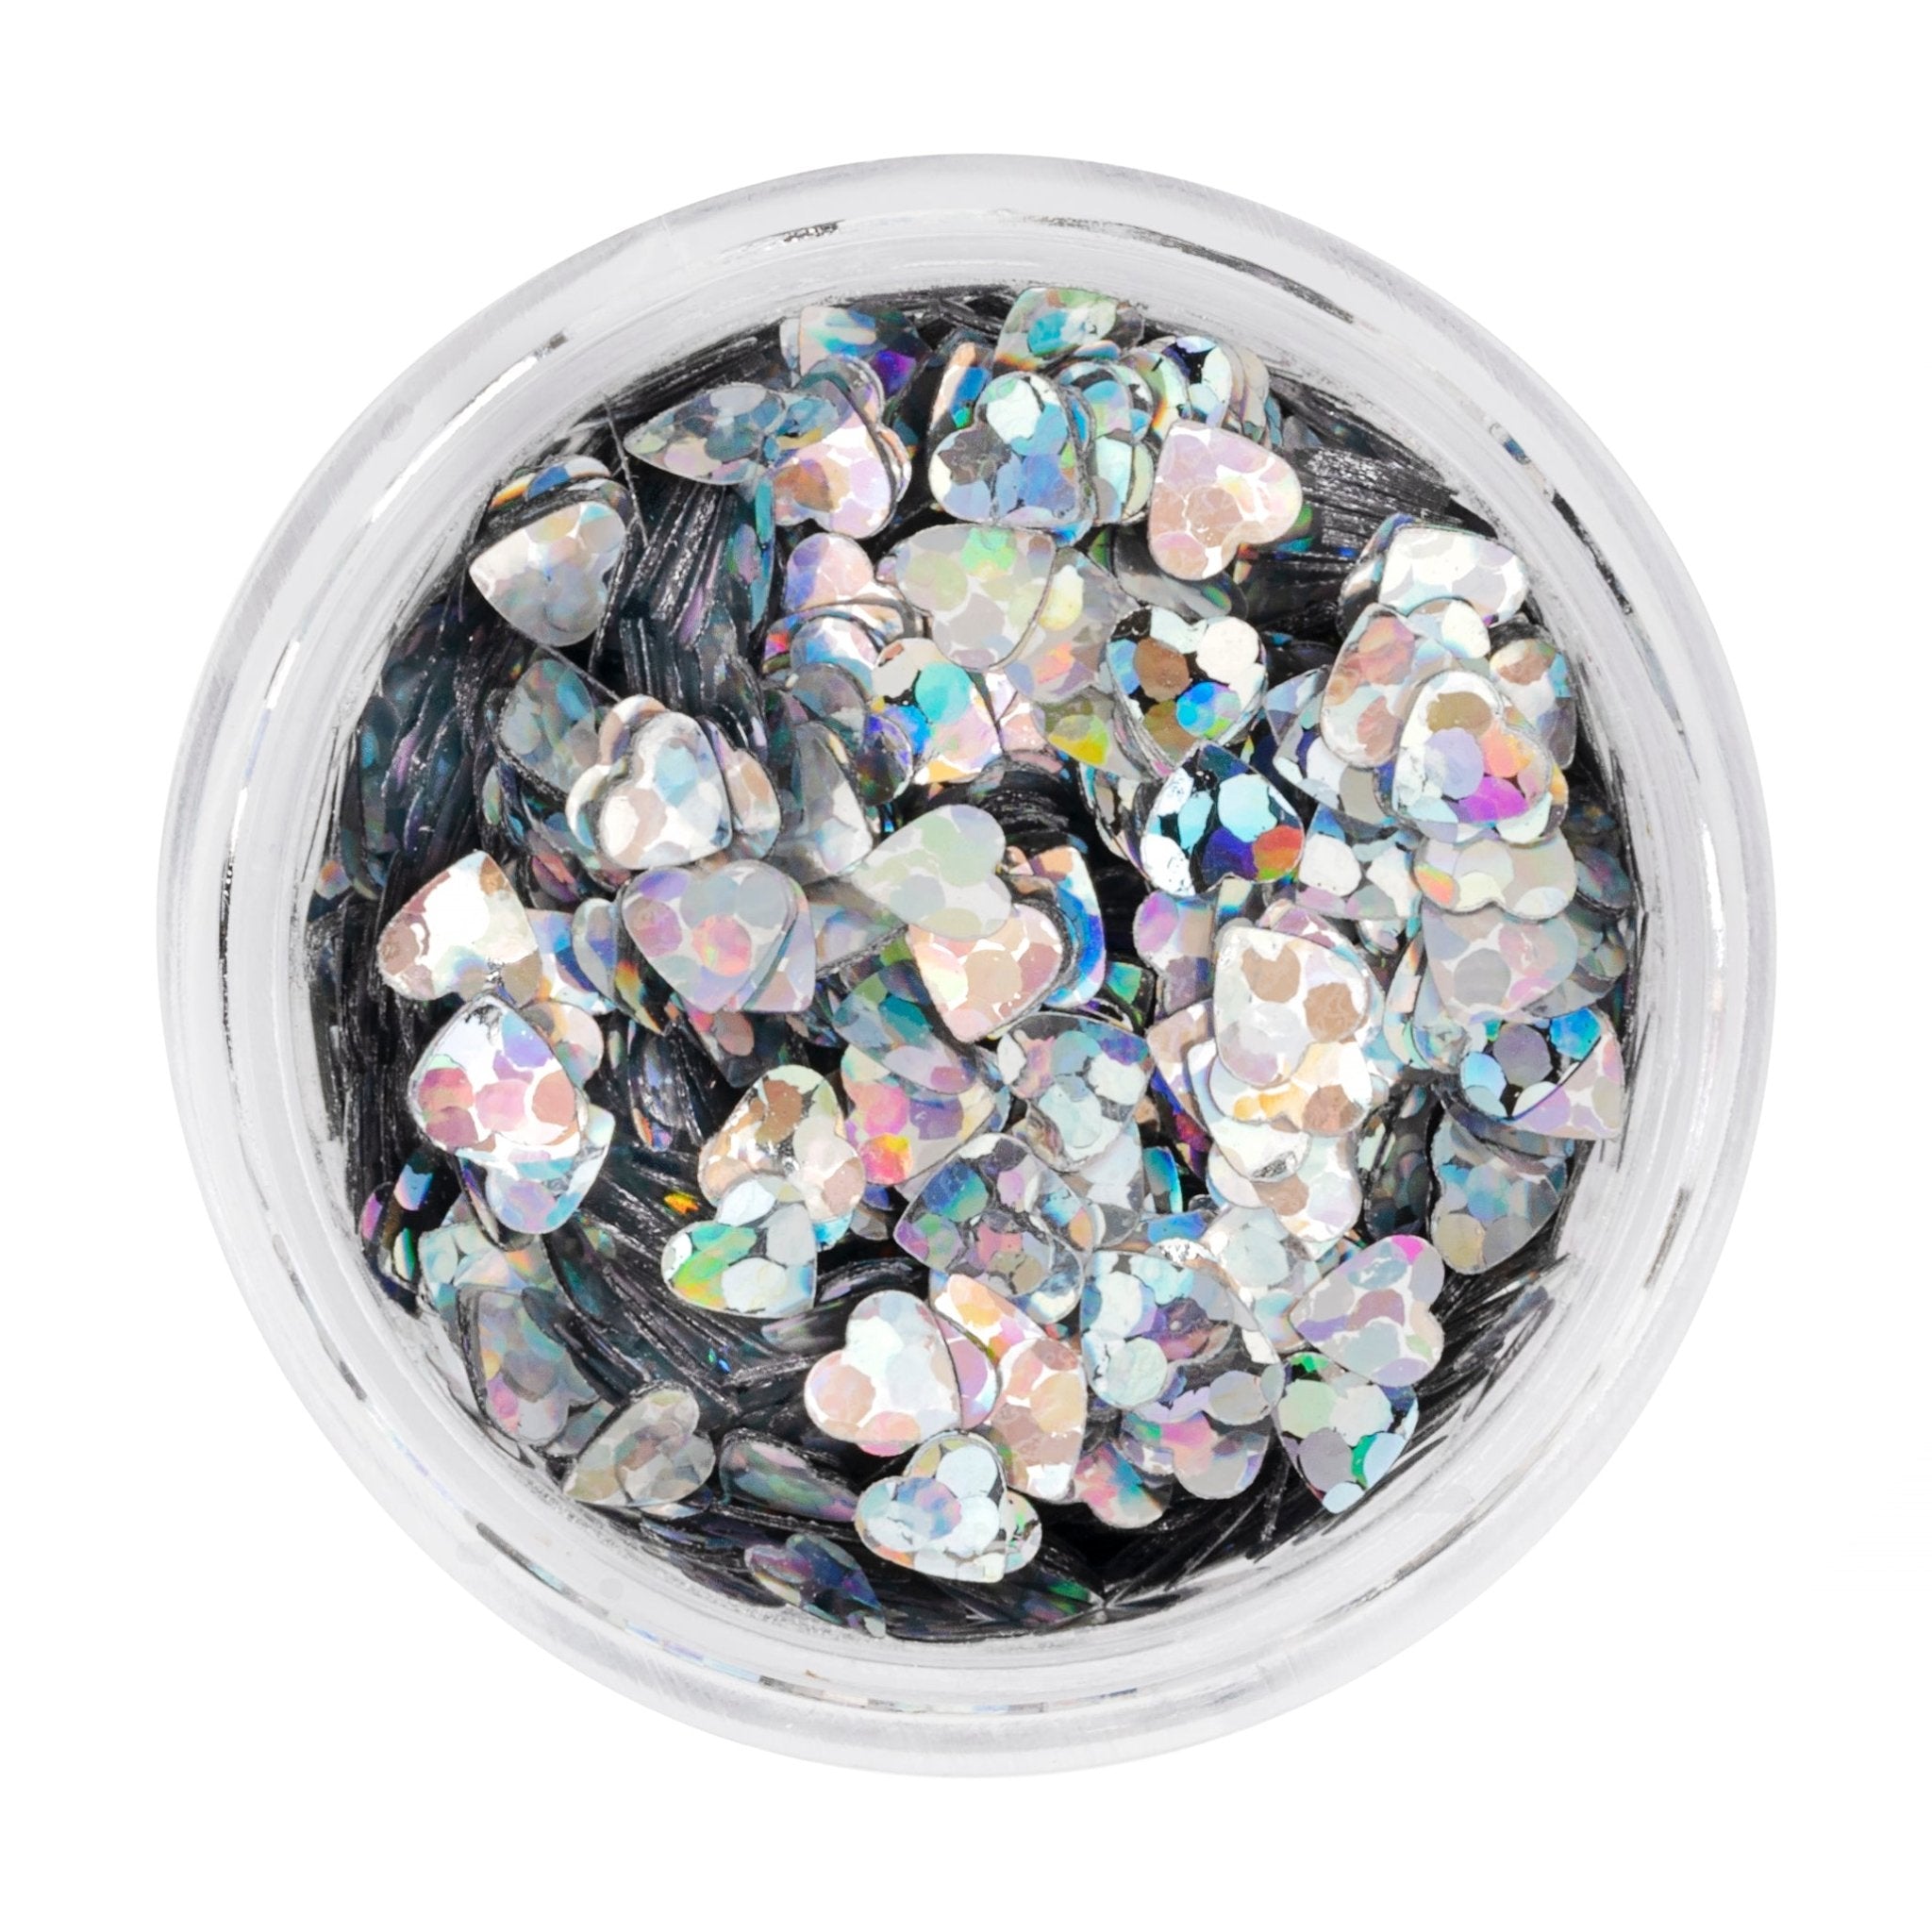 NEW! Holographic Hearts - Biodegradable Glitter - Dust & Dance